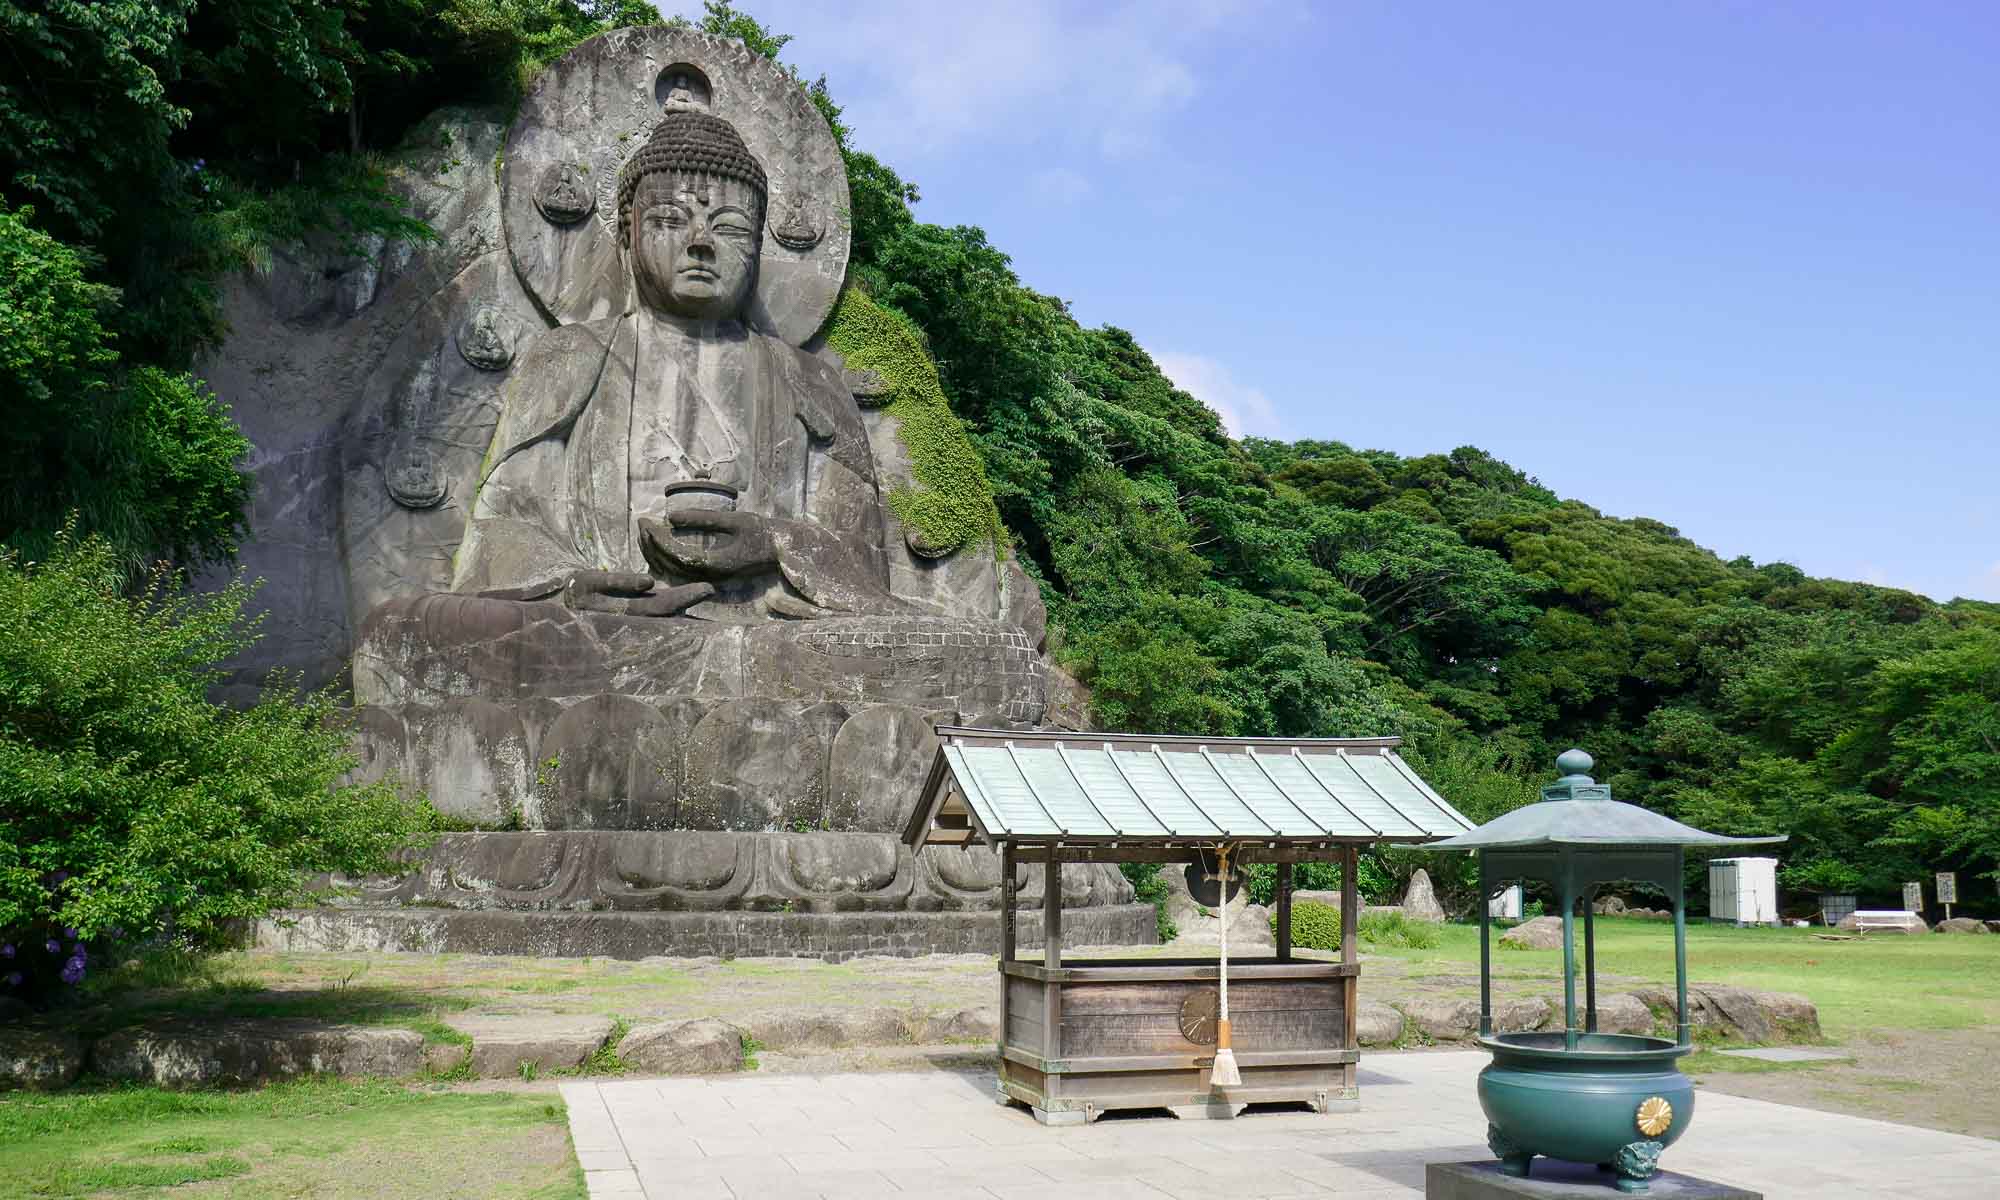 The largest stone-carved Buddha statue